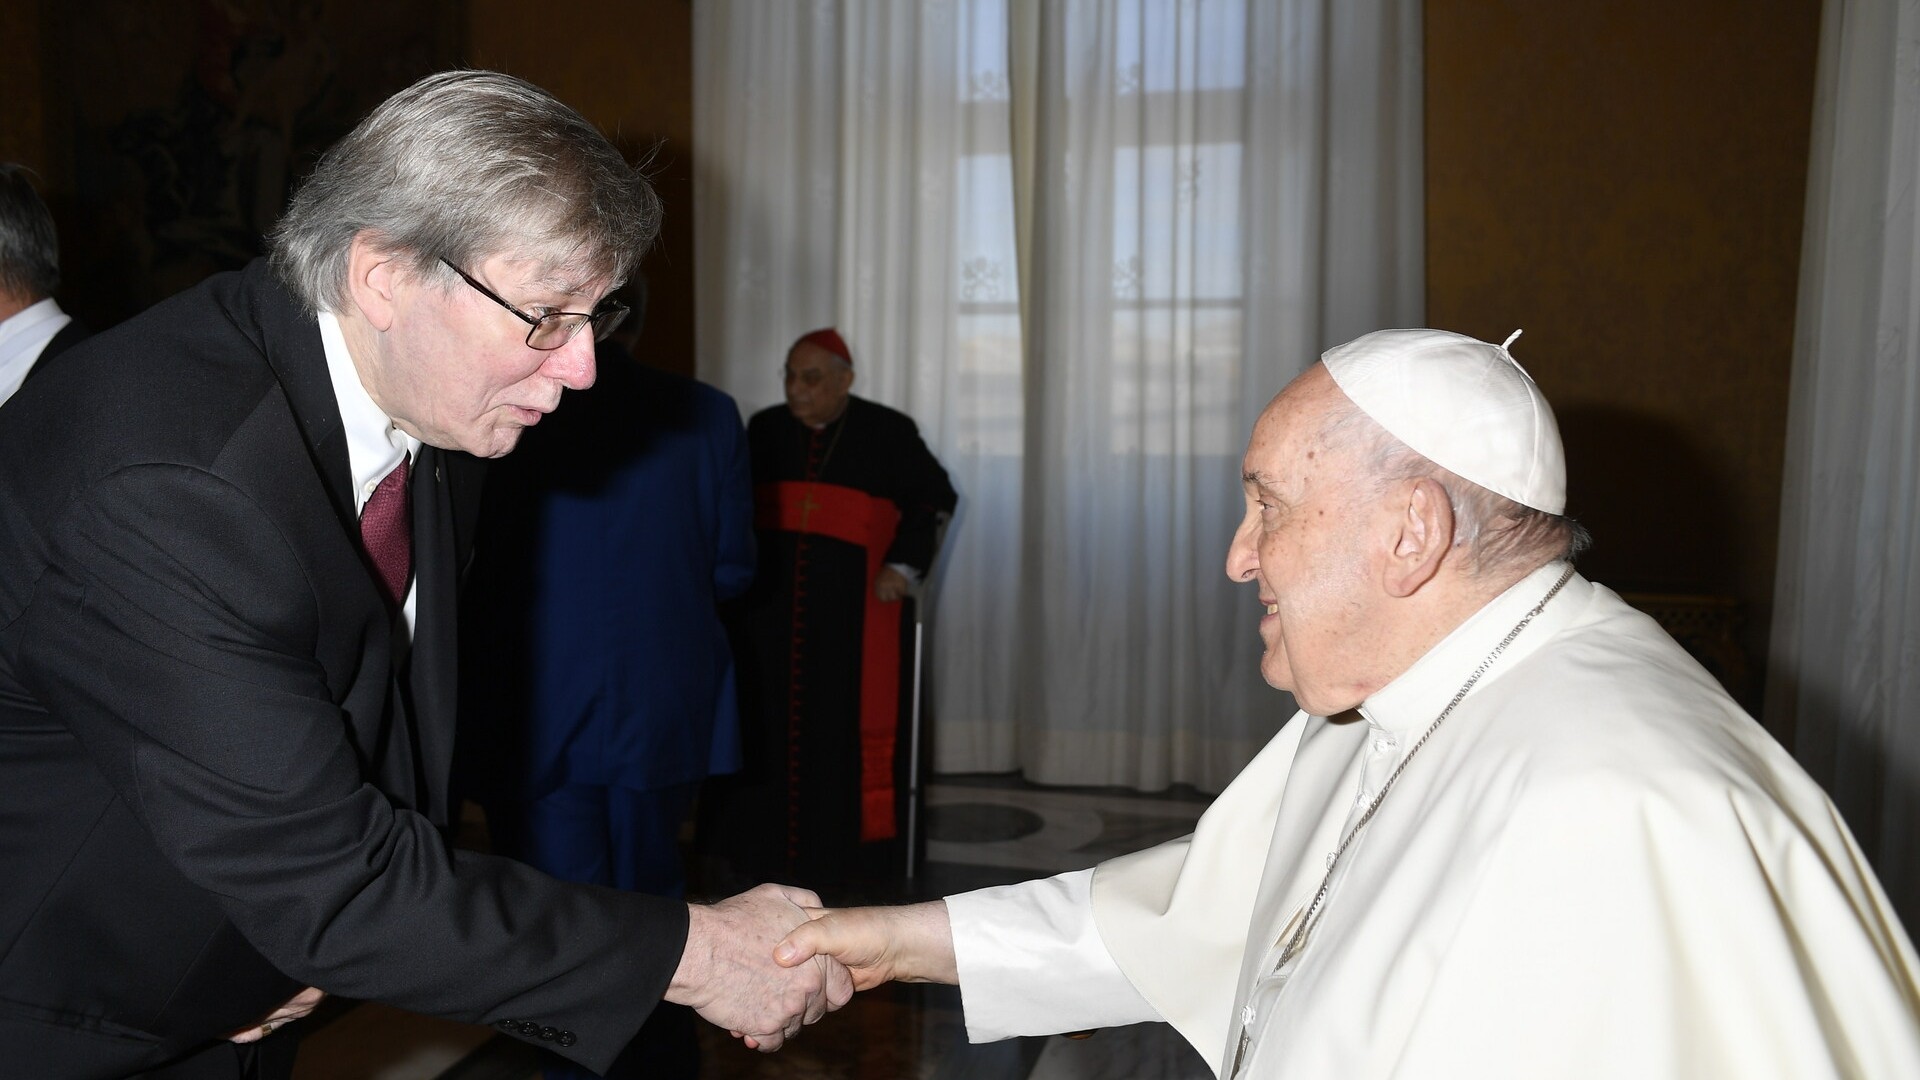 Dr. Sweet and Pope Francis